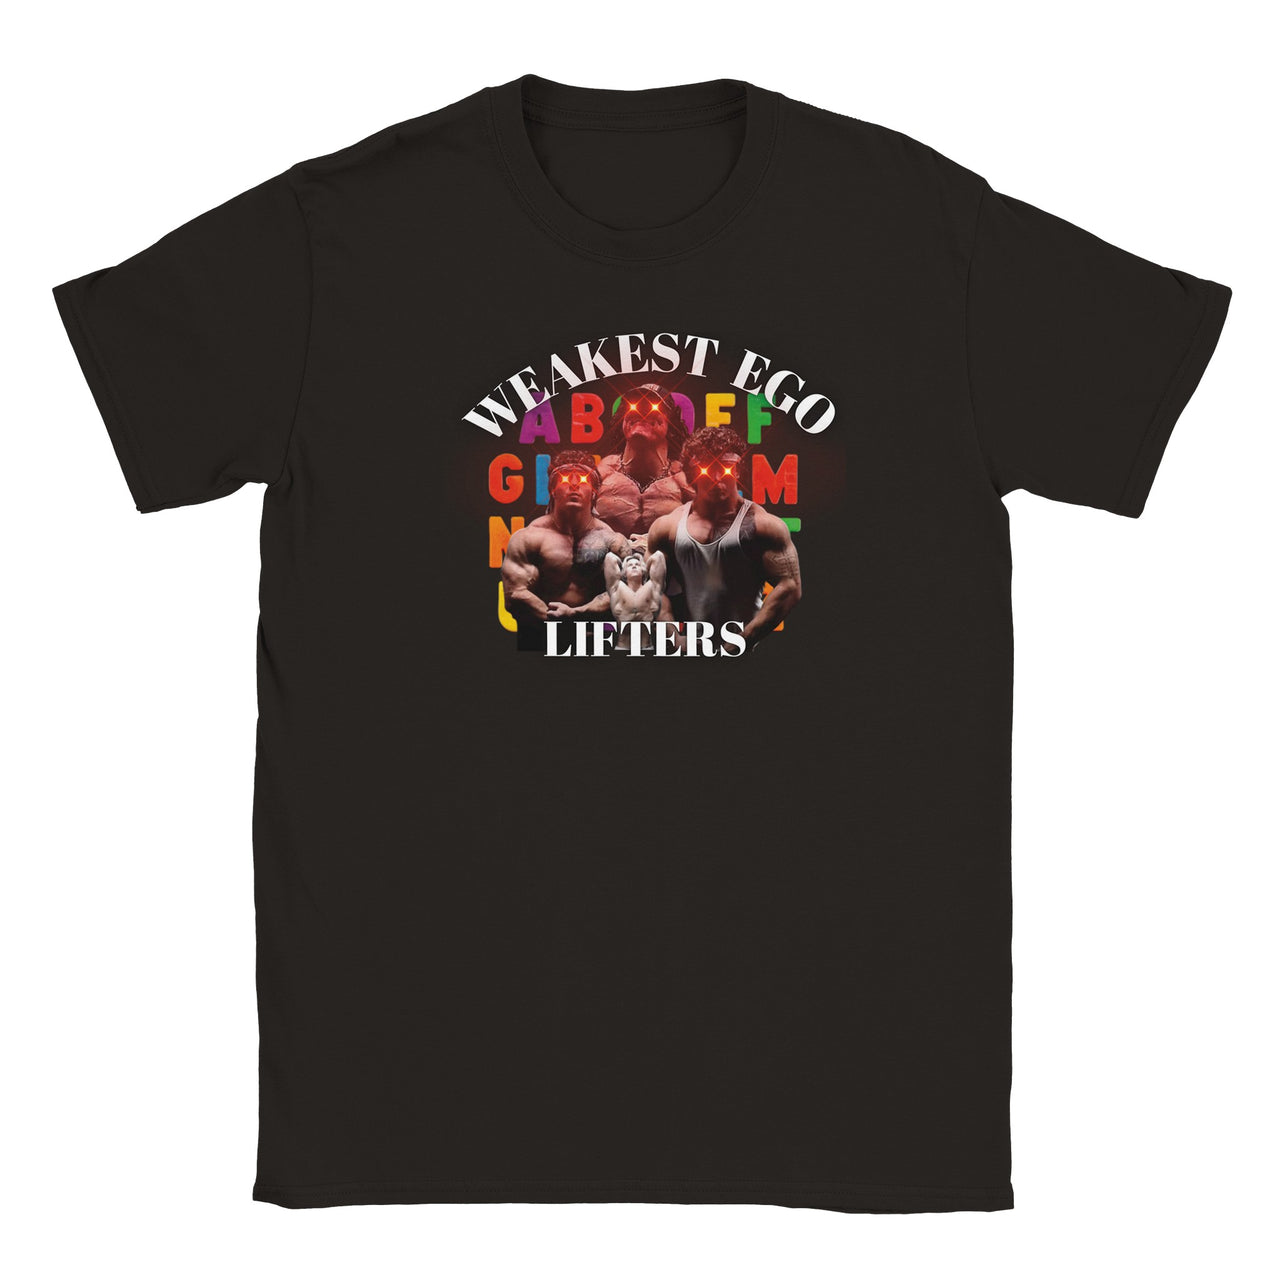 Weakest Ego Lifters T-shirt